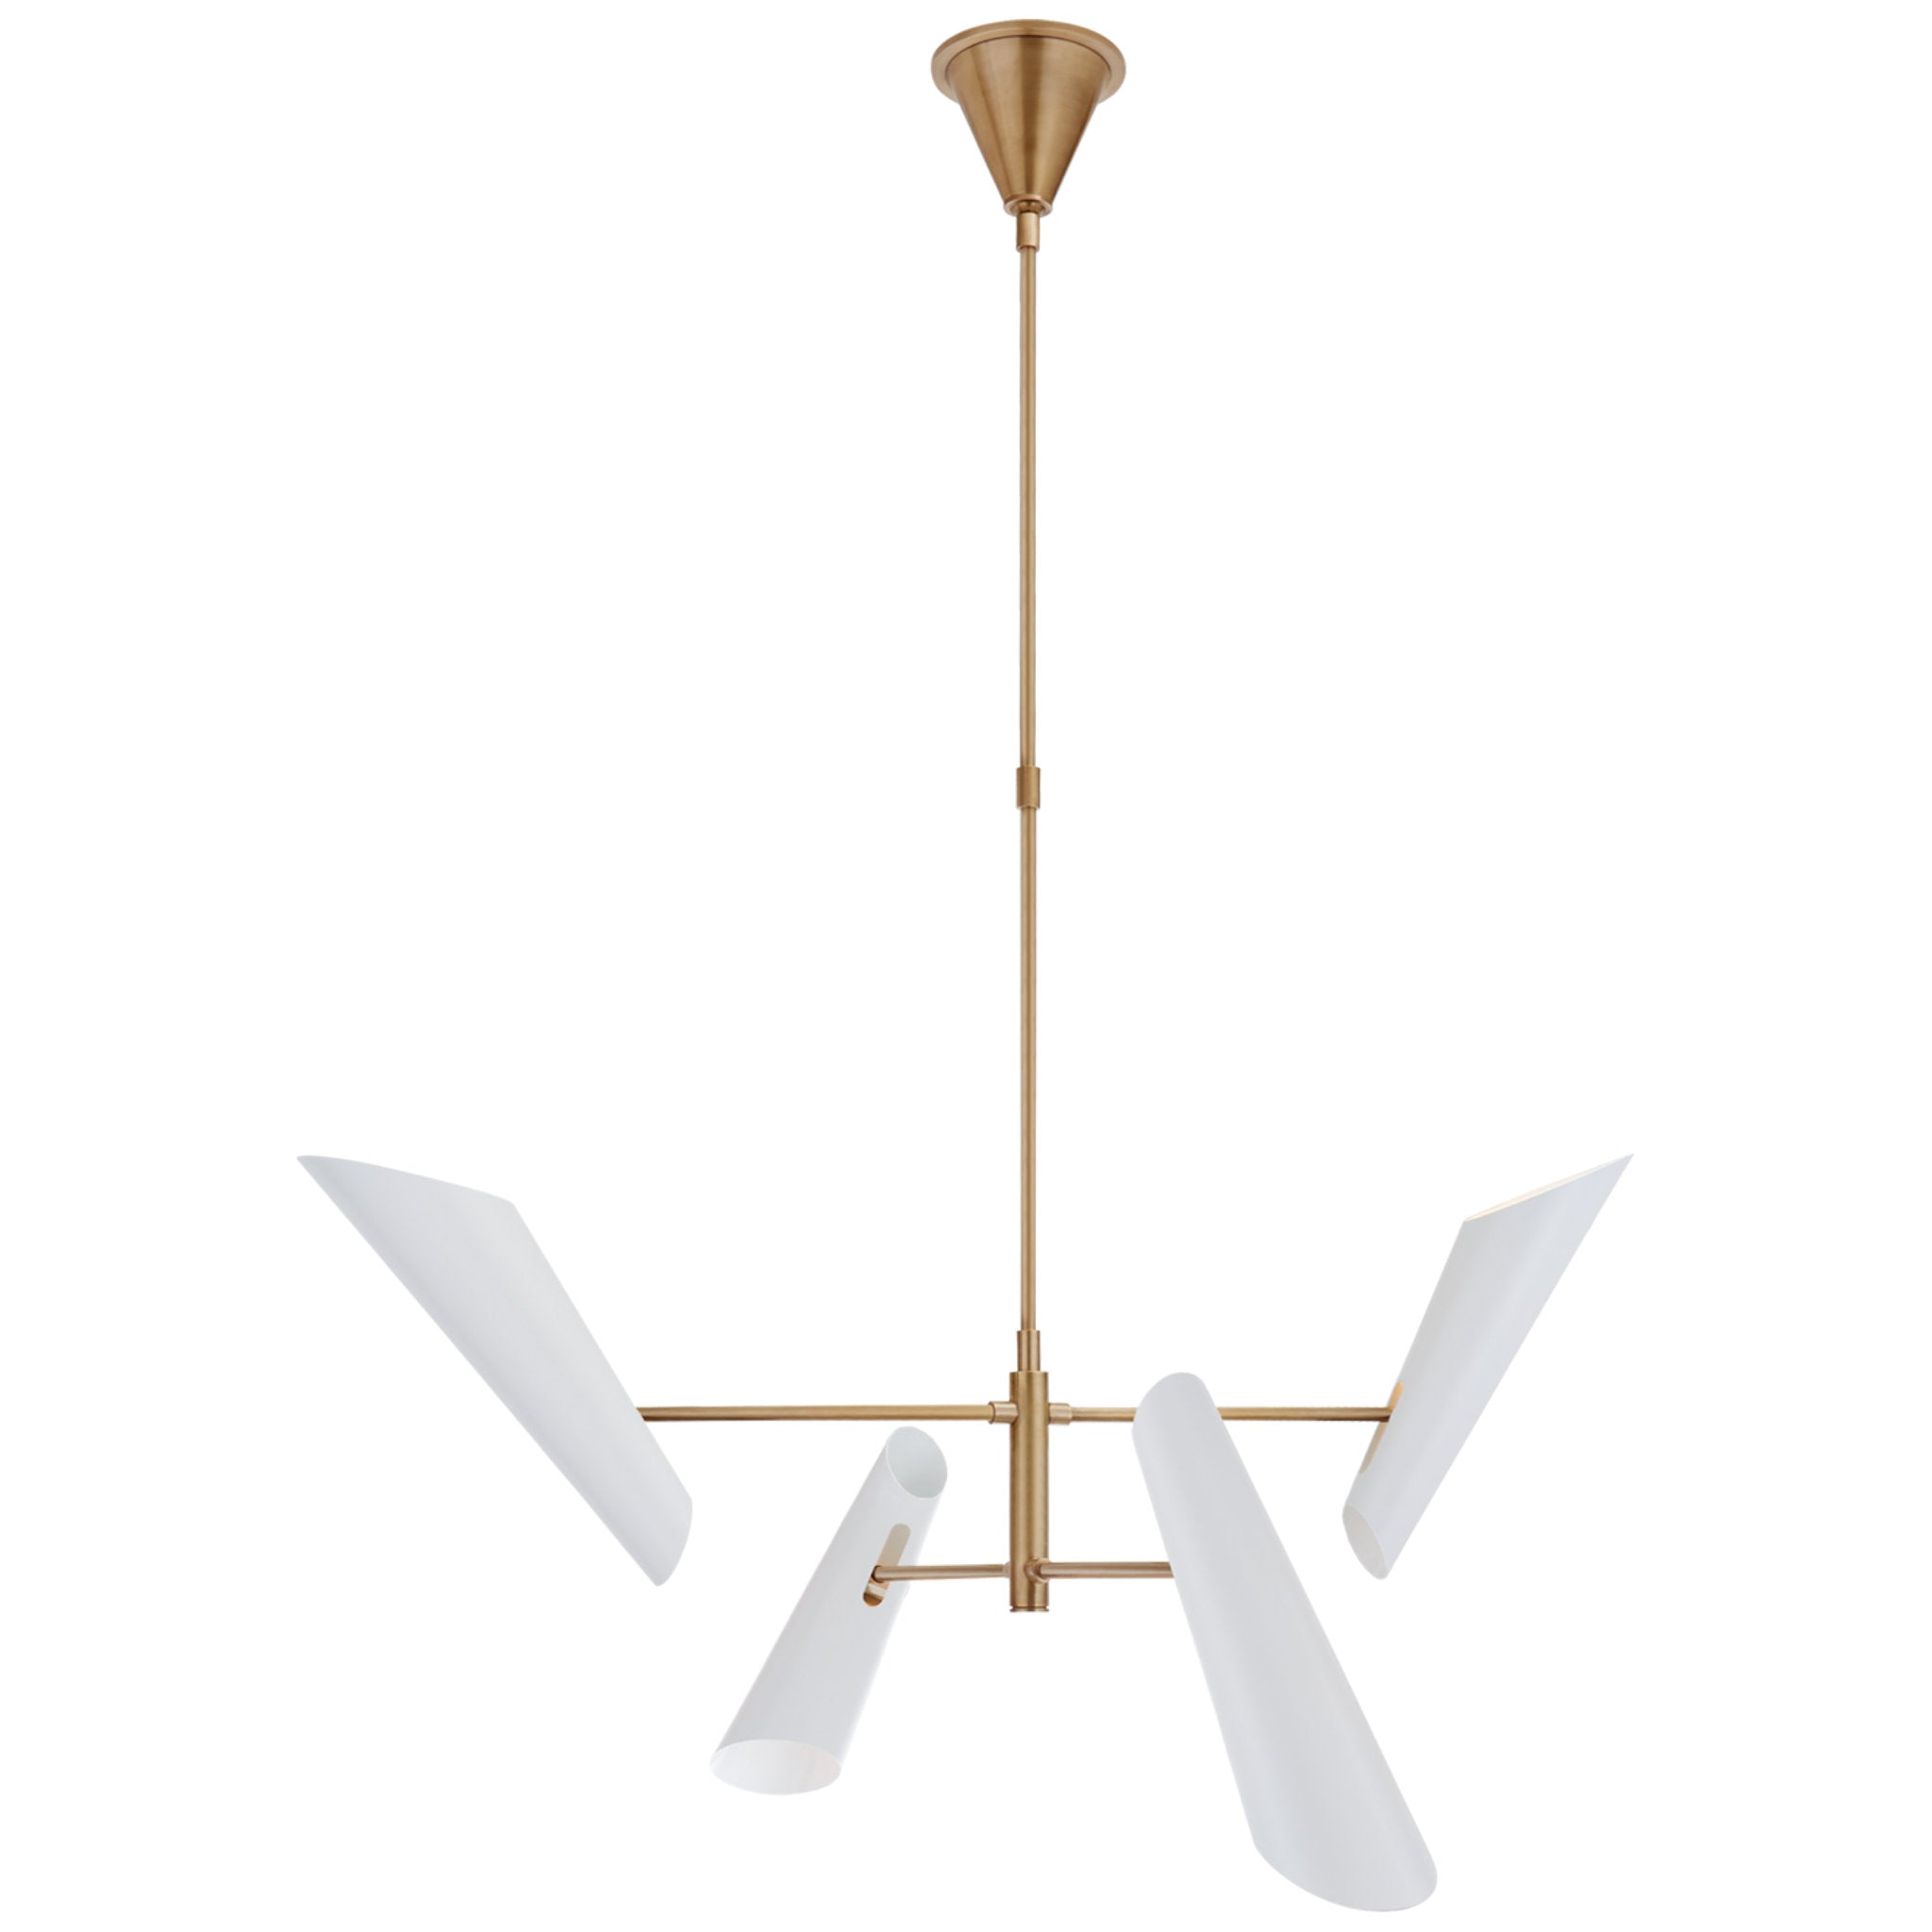 AERIN Franca Small Pivoting Chandelier in Hand-Rubbed Antique Brass with White Shades